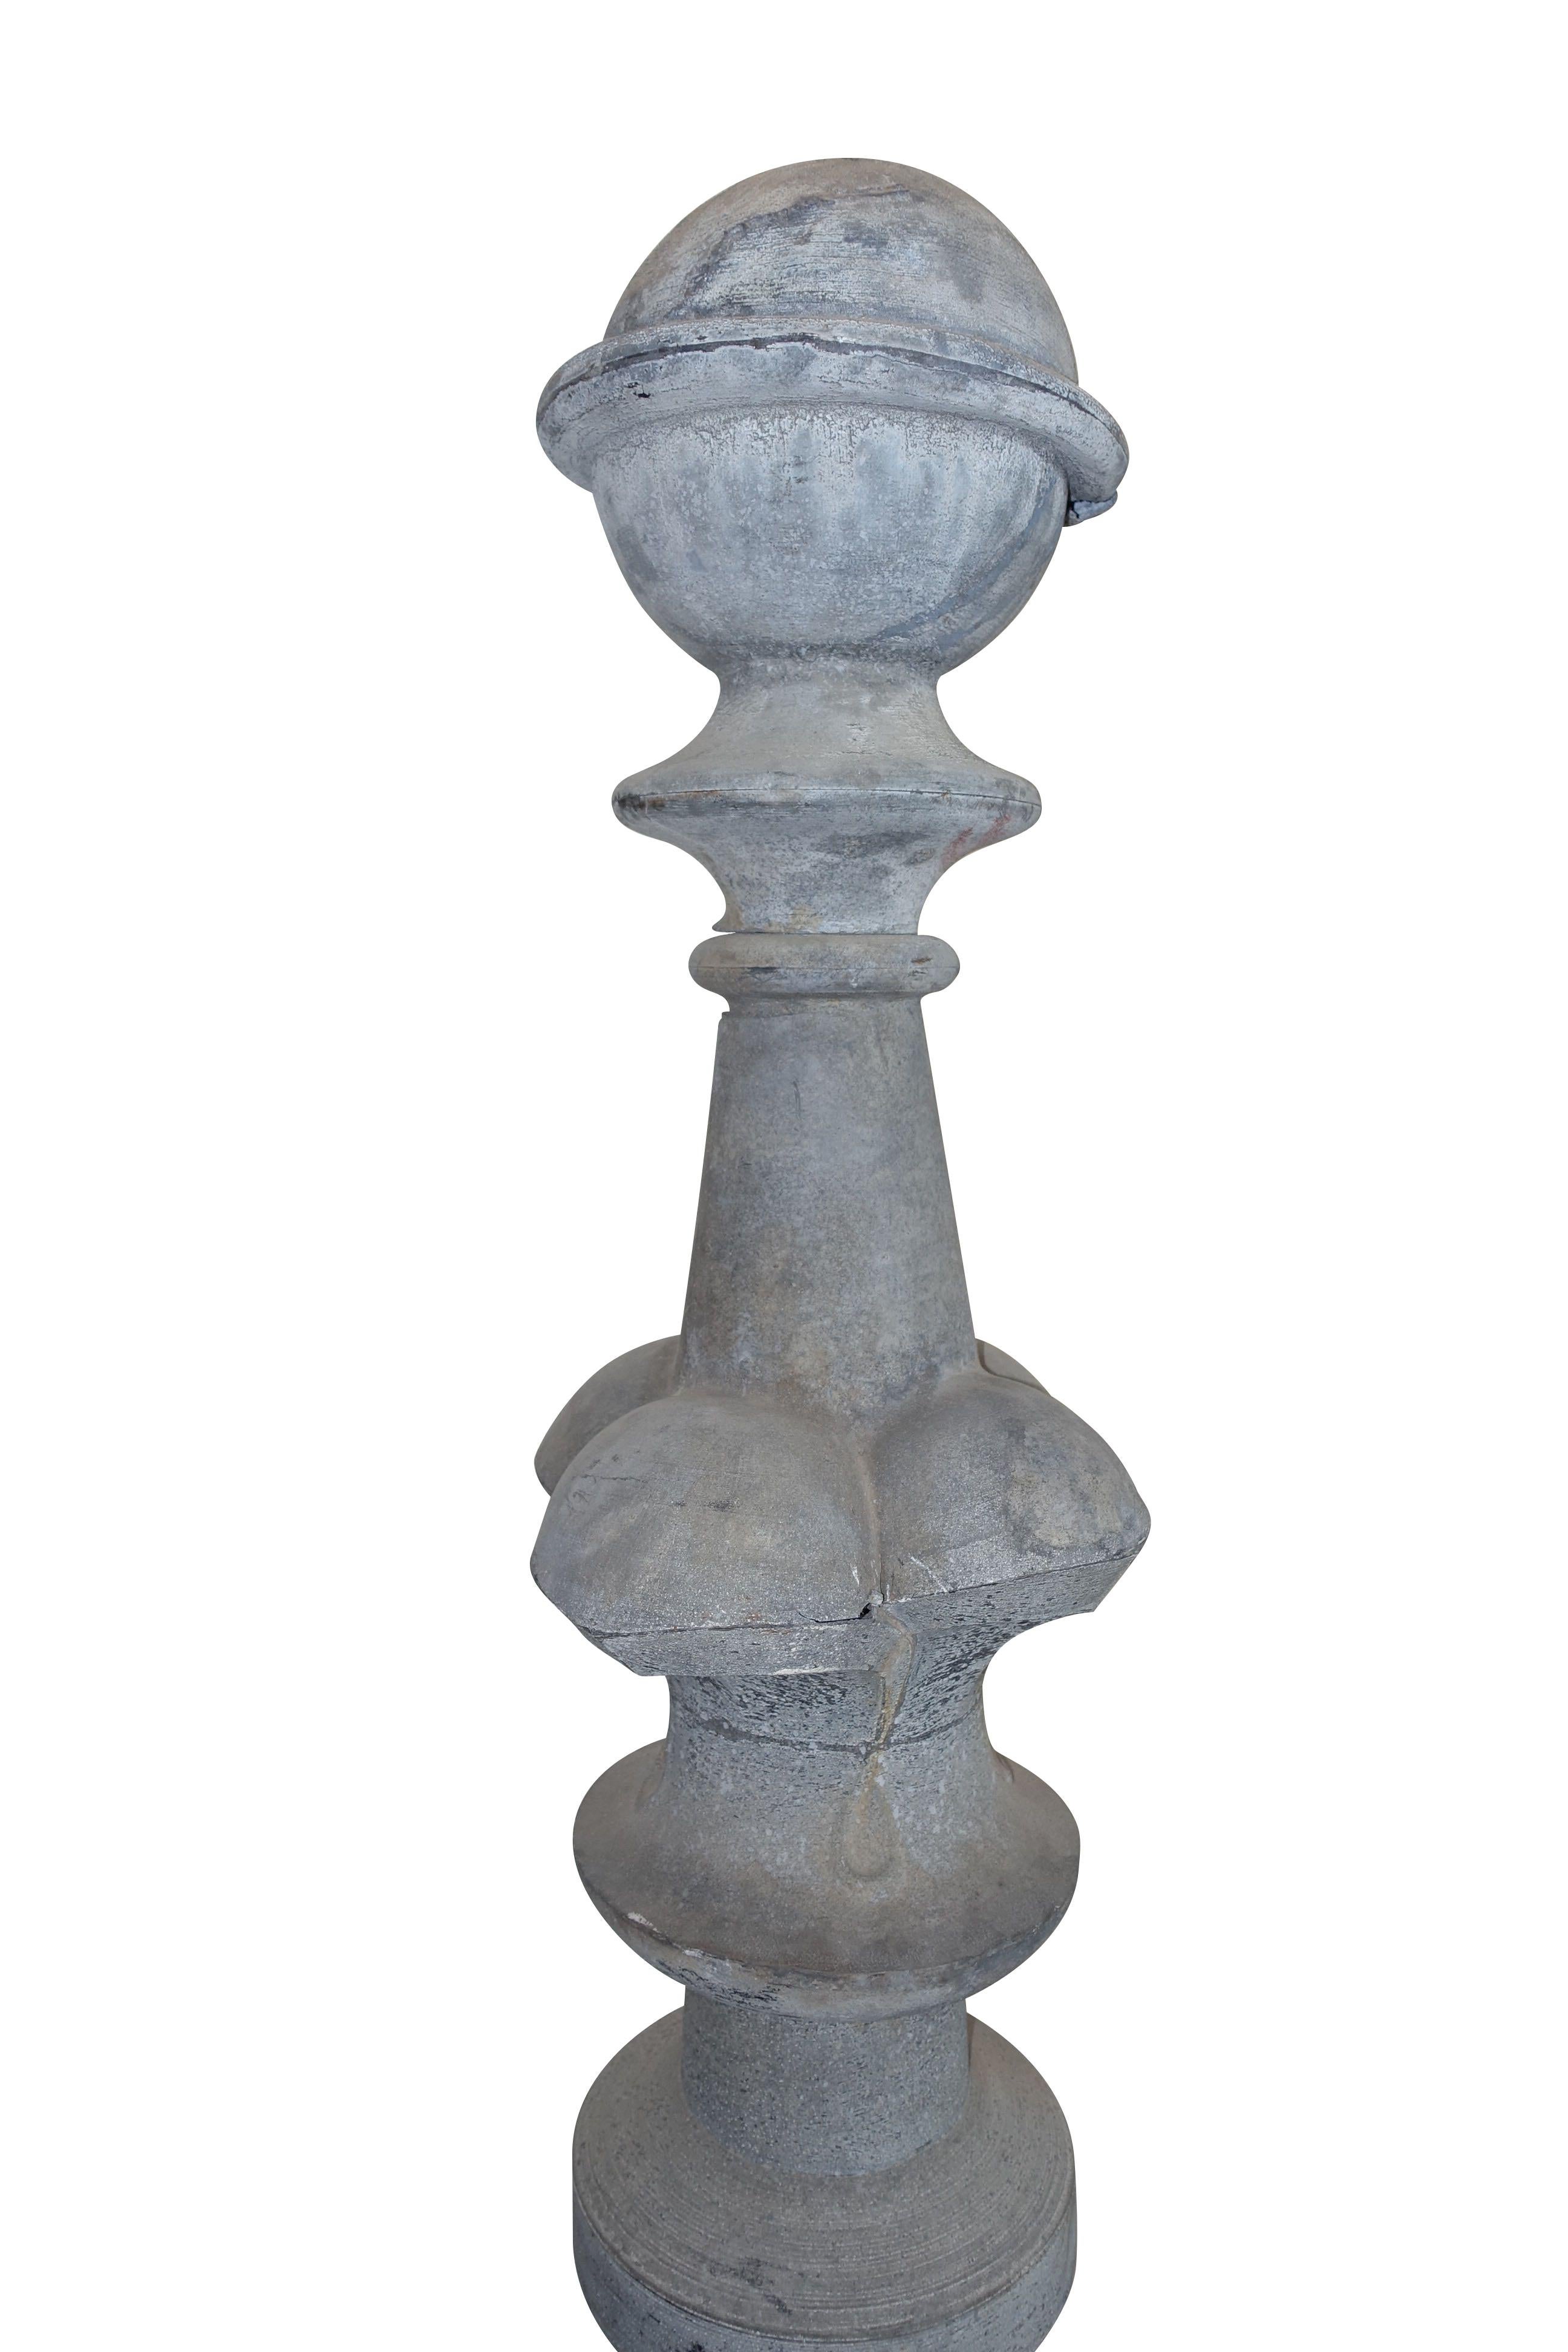 19th century French large zinc finial was originally a decorative element on a Parisienne building. It is now used as a decorative sculpture.
The finial has a beautiful natural patina.
It stands on a custom steel stand.